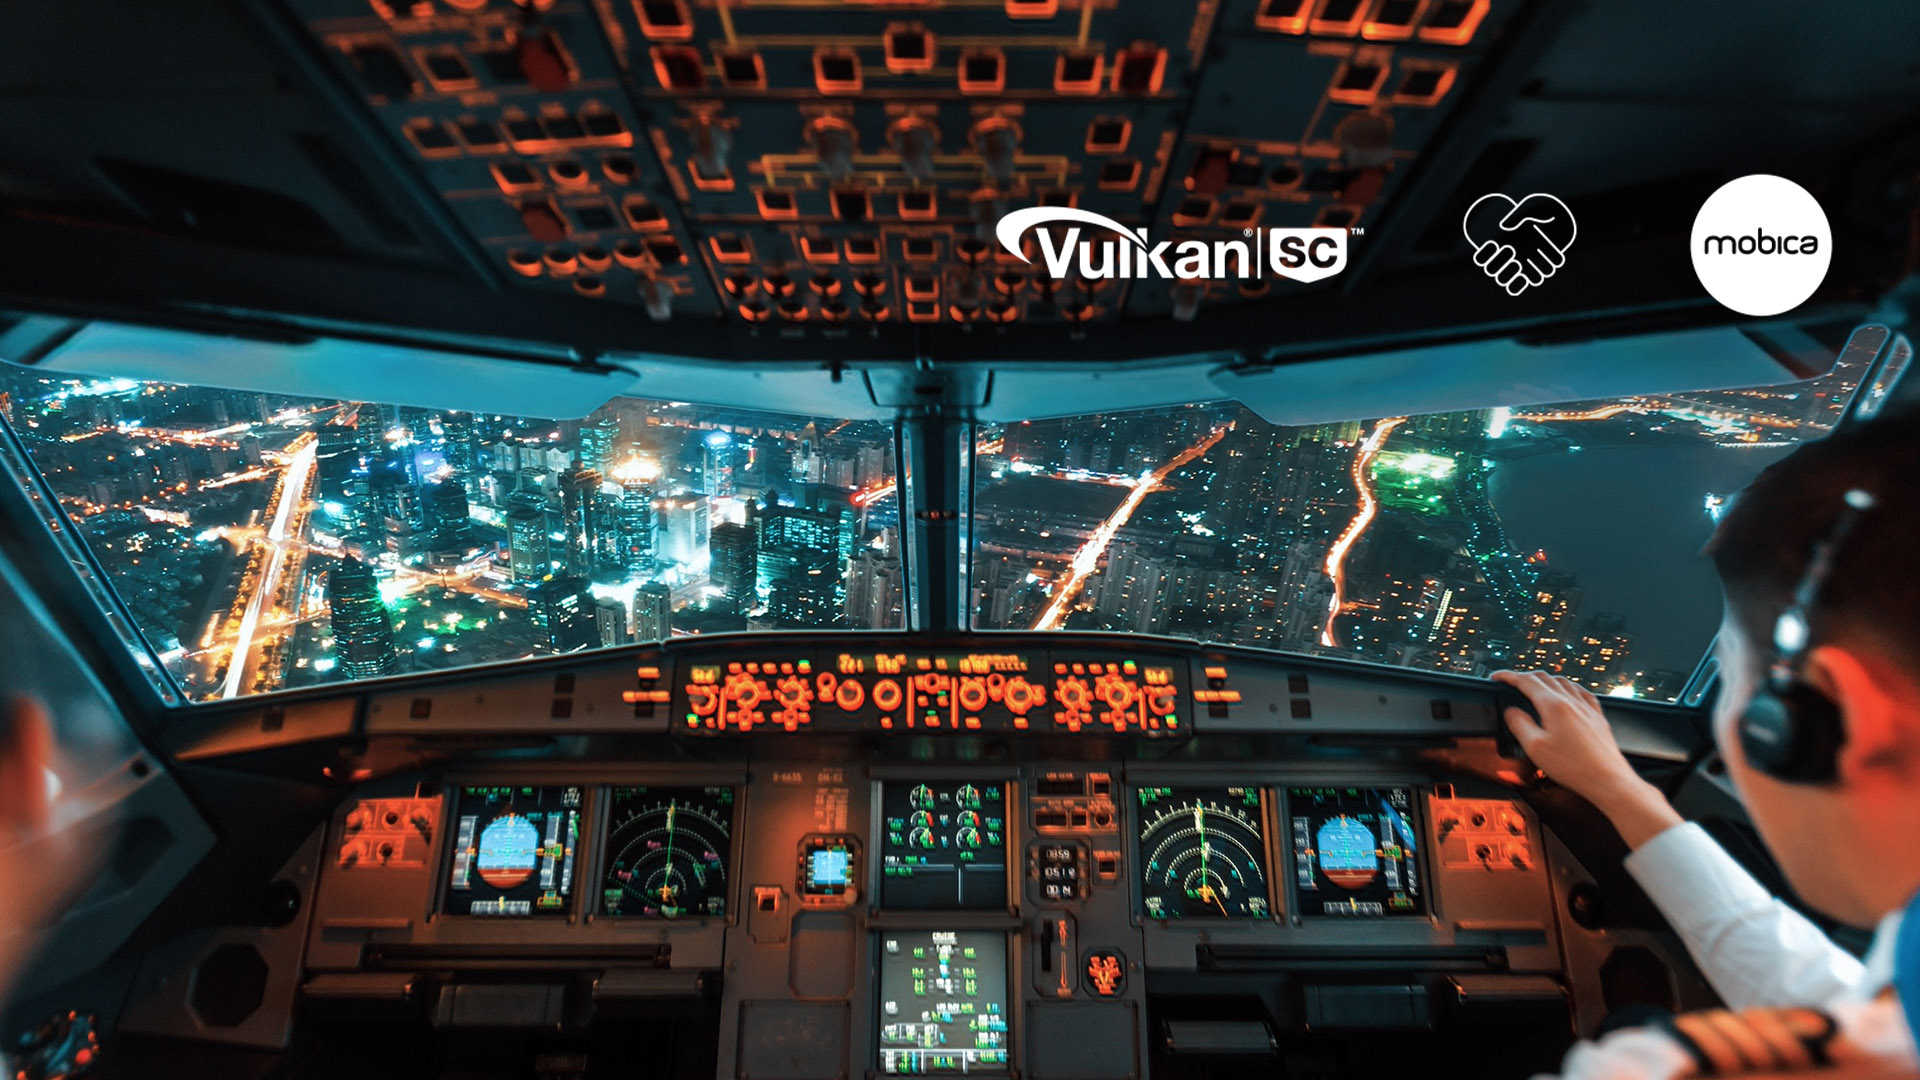 Mobica and Khronos collaborate to develop Vulkan SC 1.0 Specification